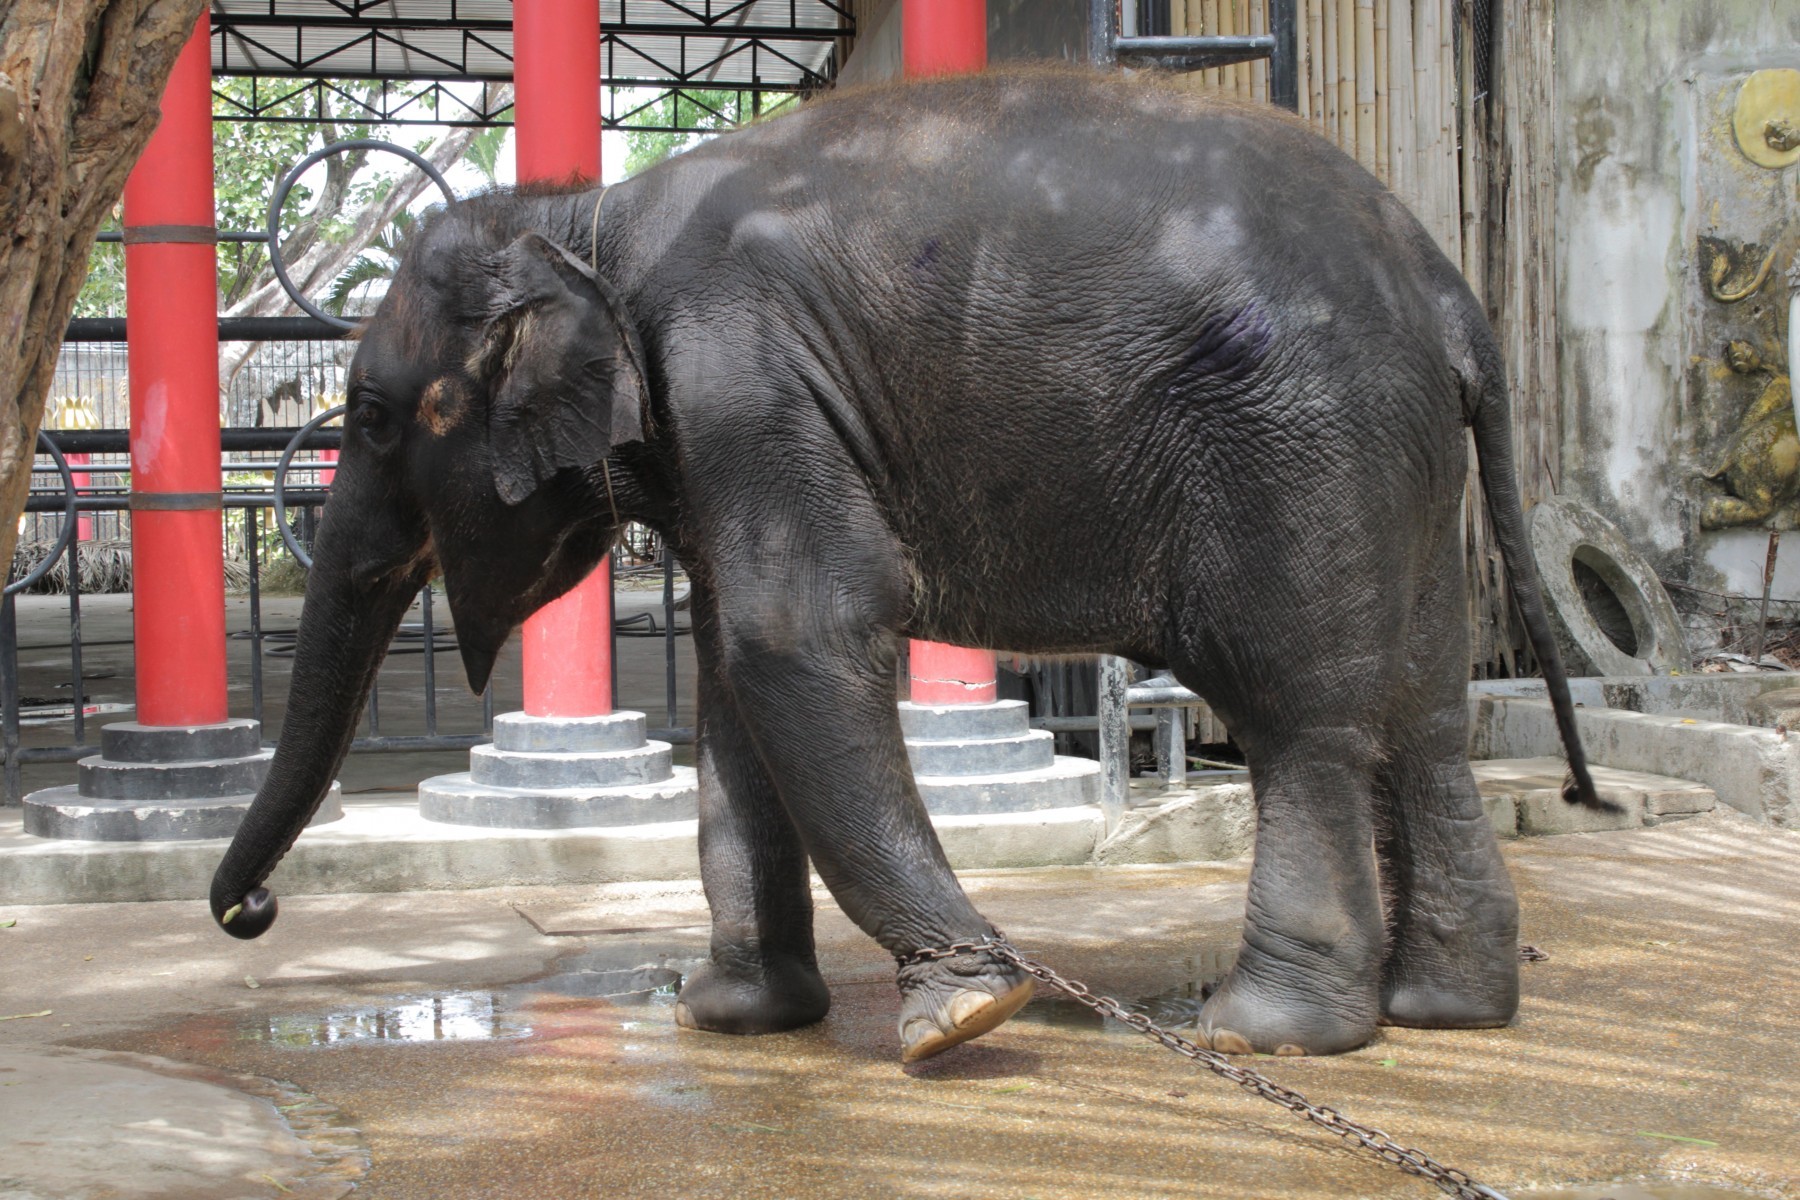 Pictured: An elephant kept in chains.